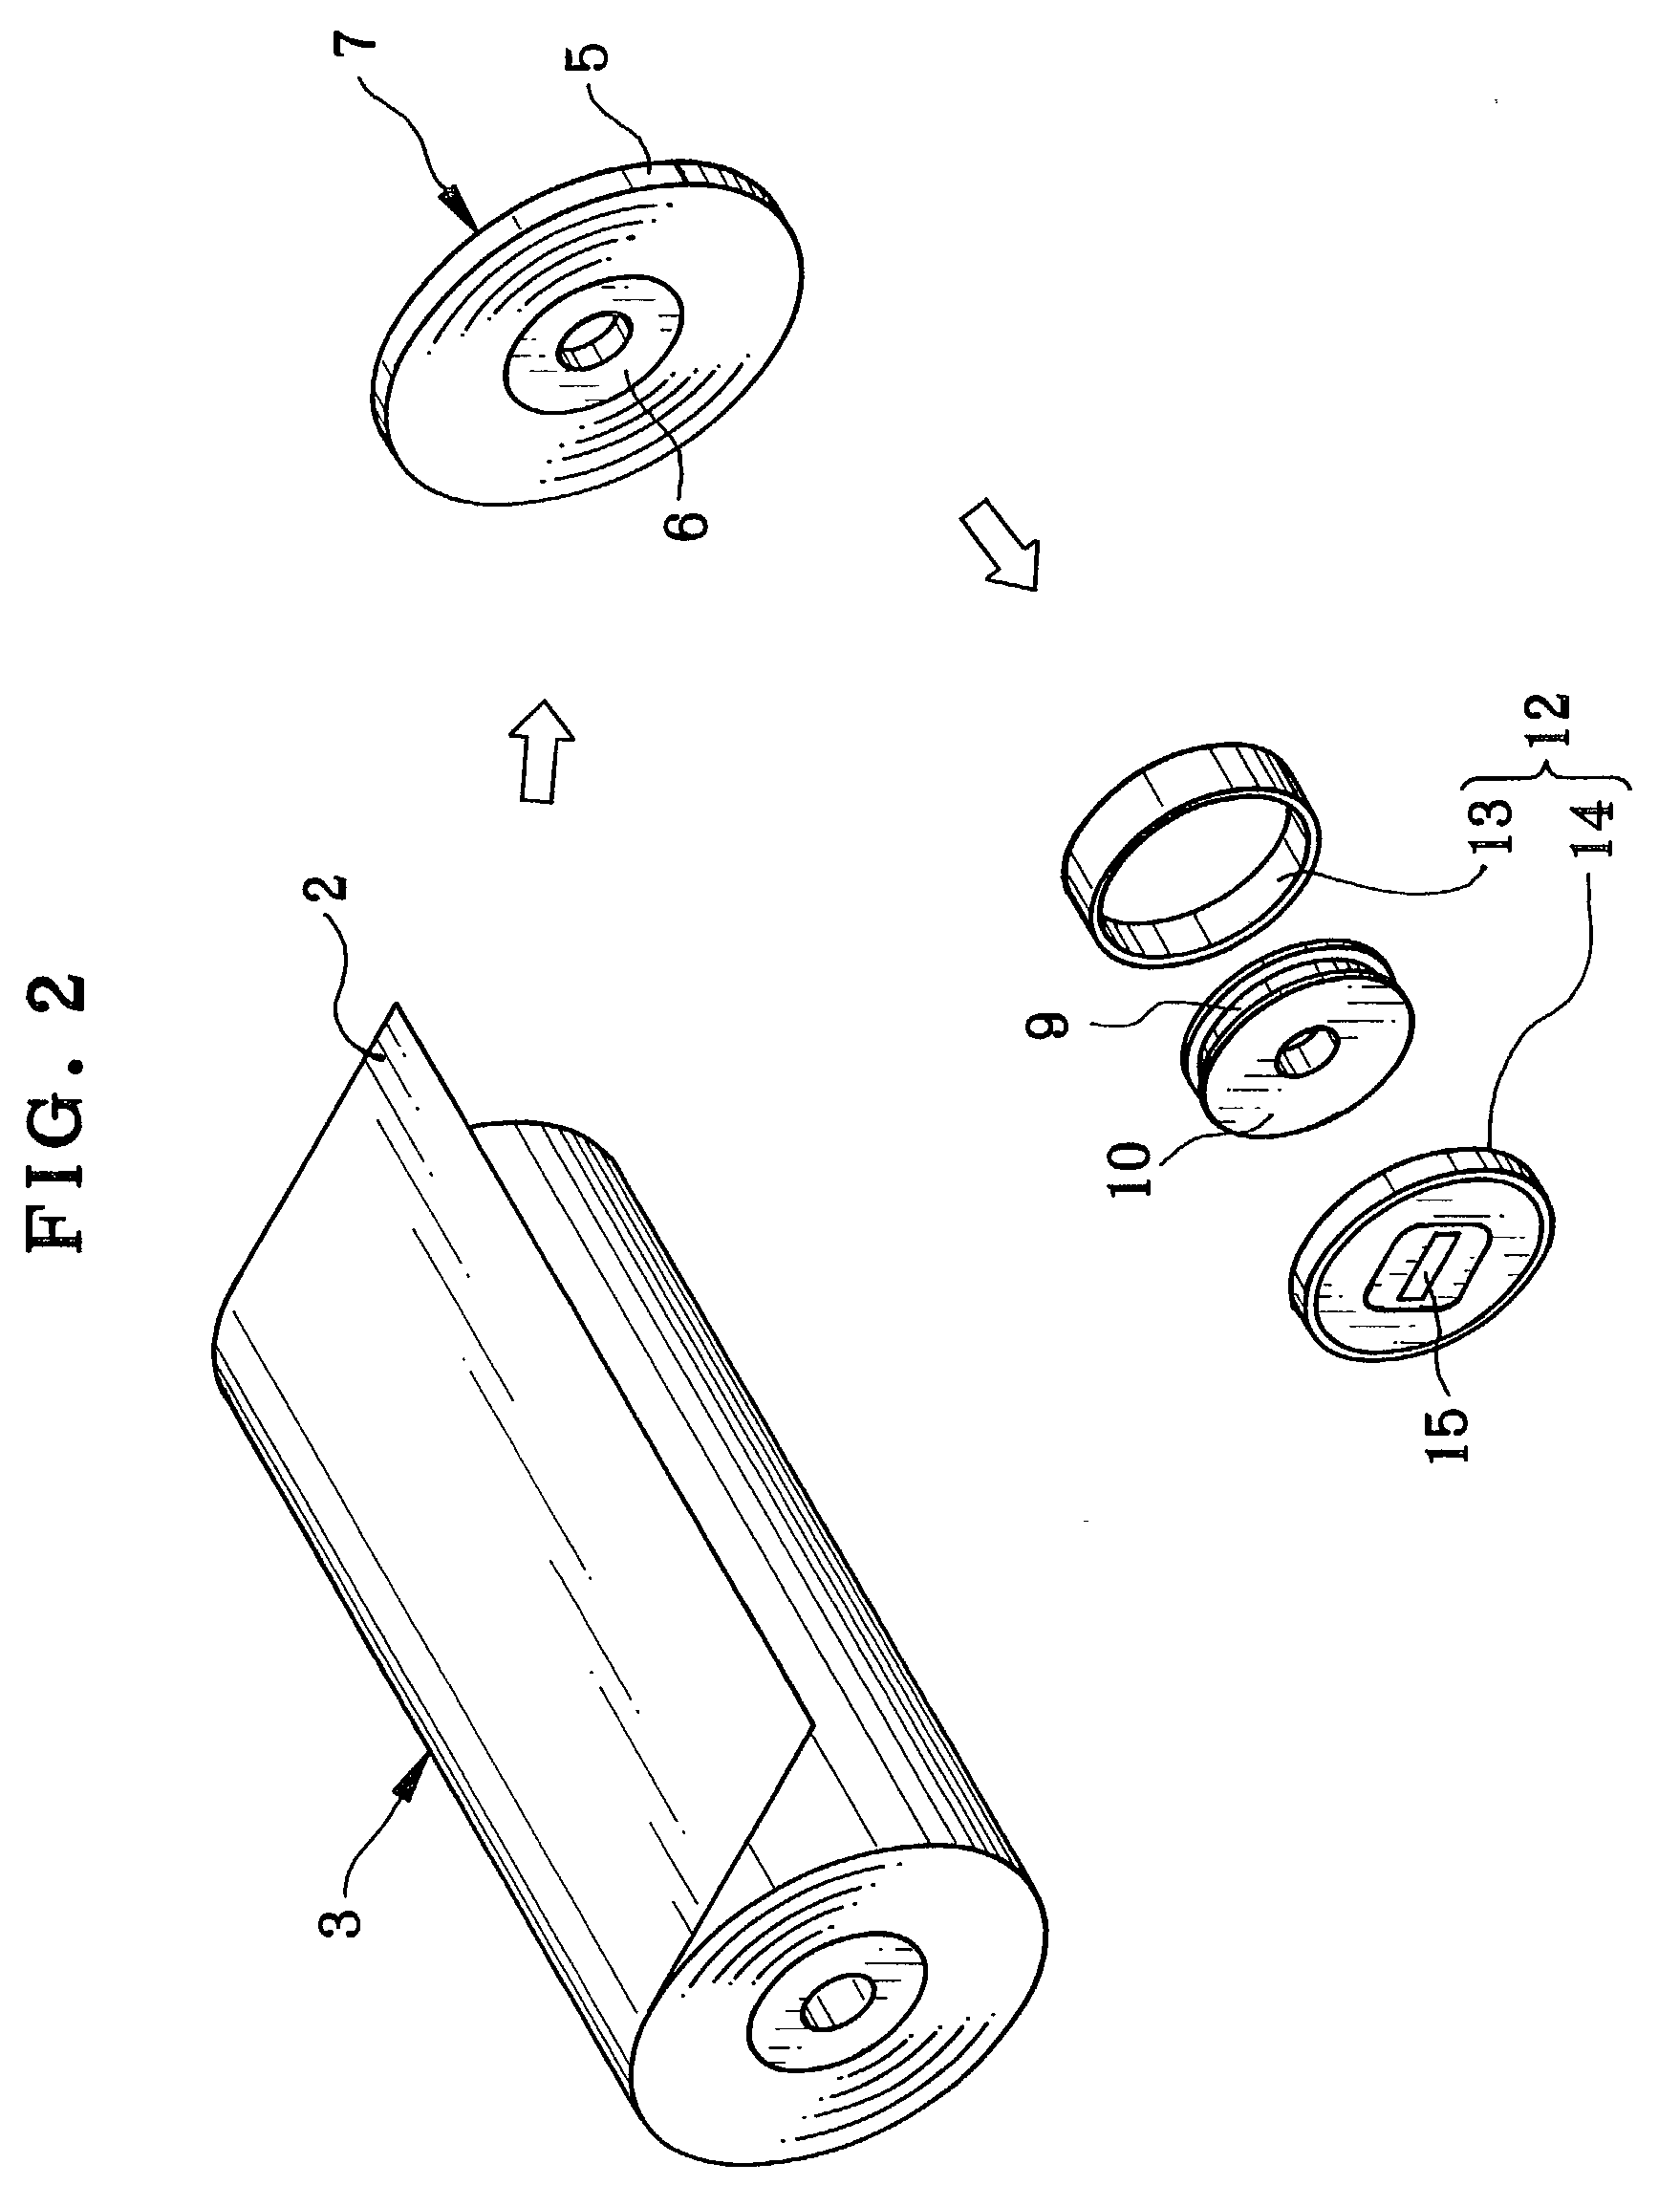 Production managing method for photo film production